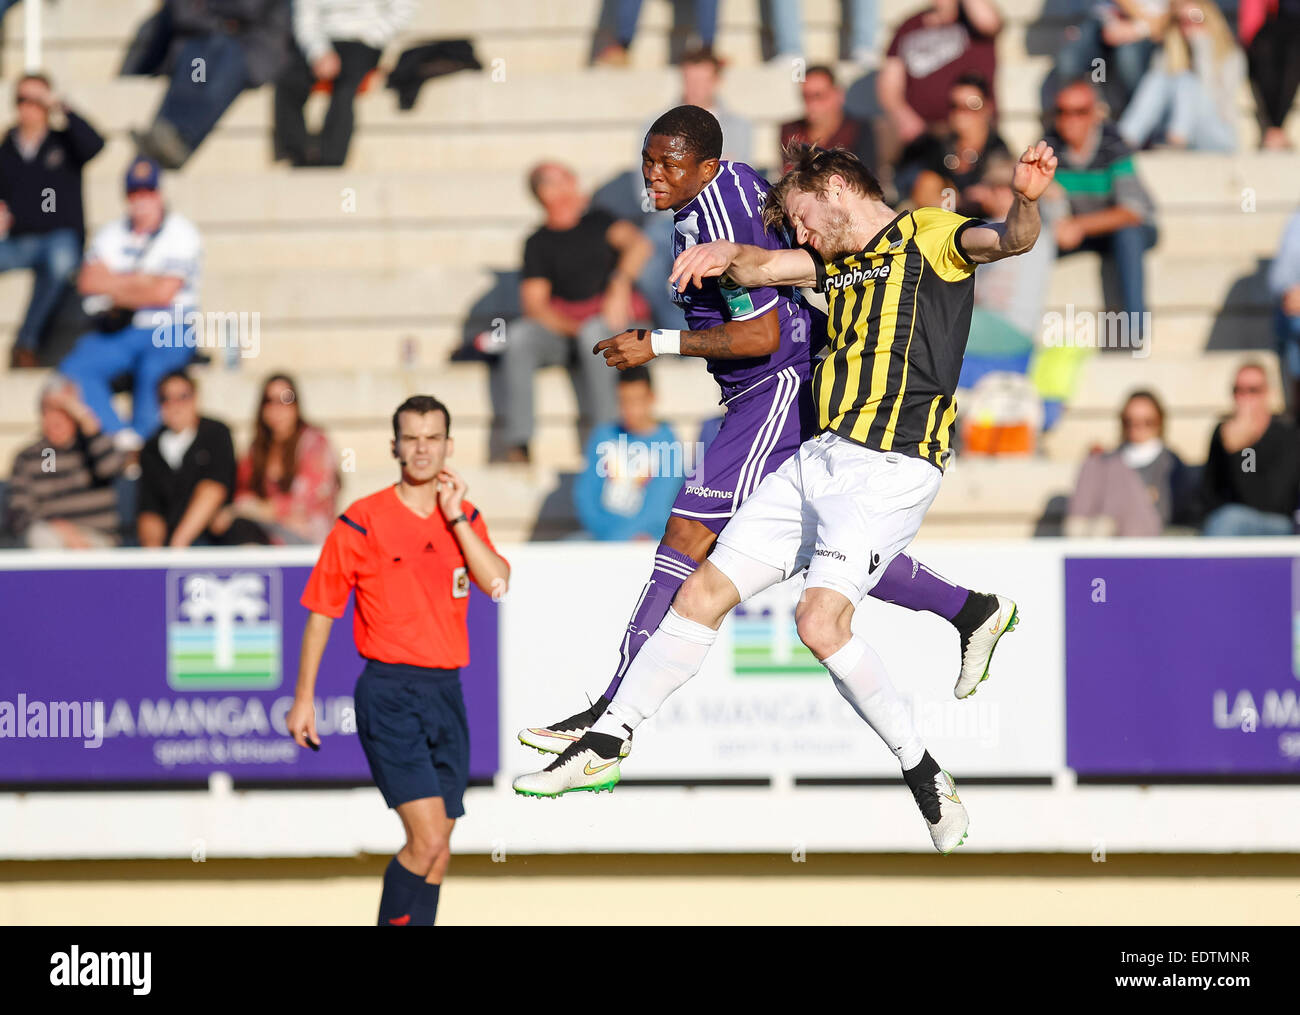 Friendly Match RSC Anderlecht Vs PAOK Editorial Image - Image of europa,  atmosphere: 123389225